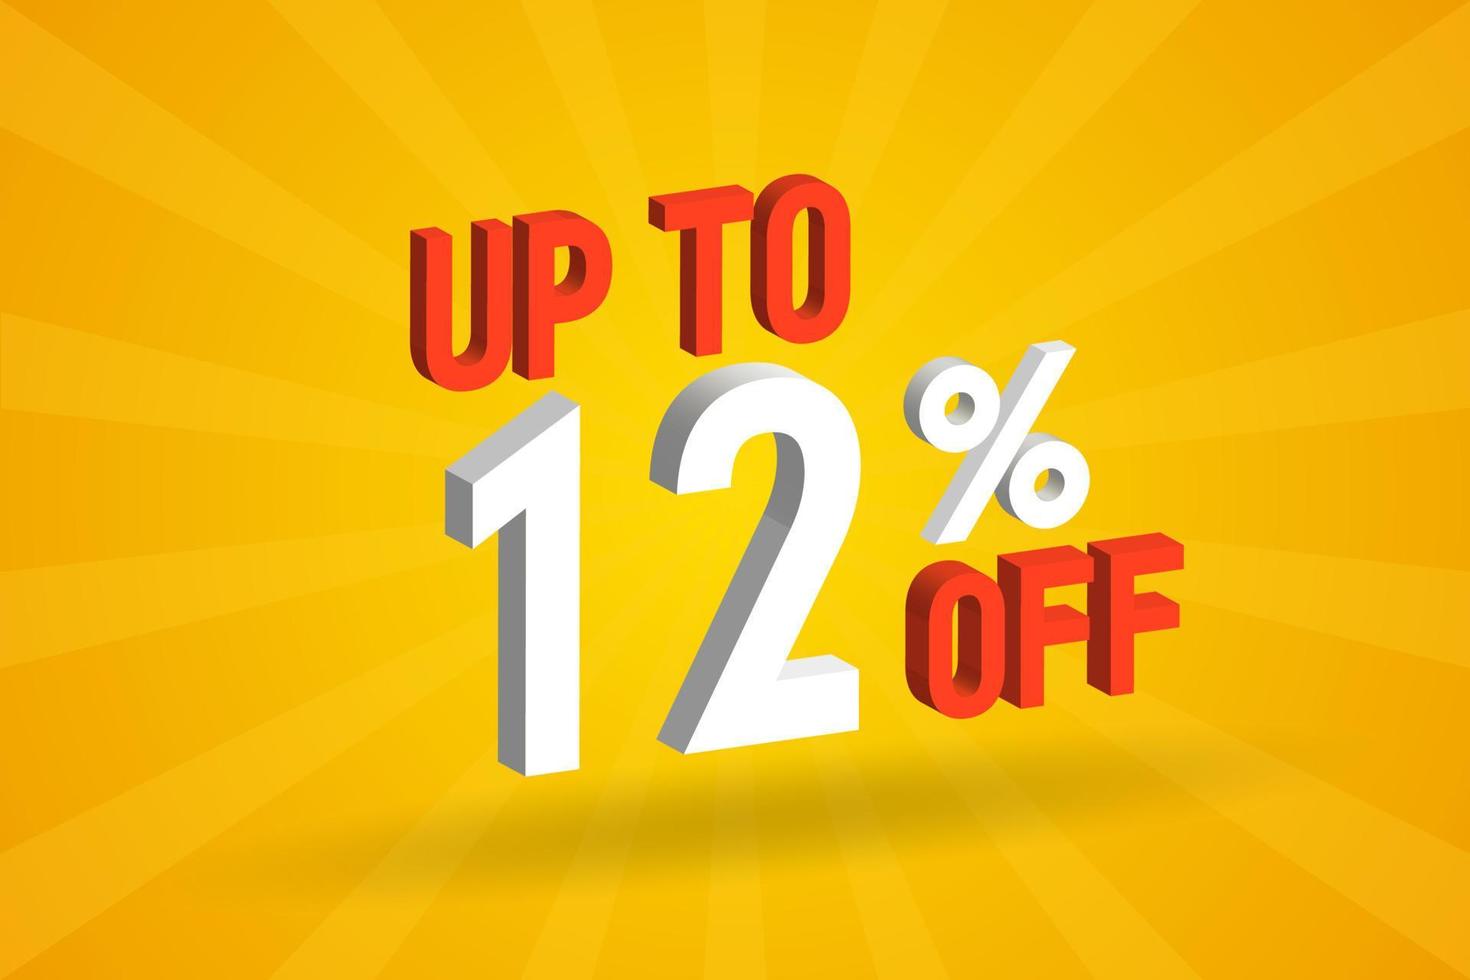 Up To 12 Percent off 3D Special promotional campaign design. Upto 12 of 3D Discount Offer for Sale and marketing. vector